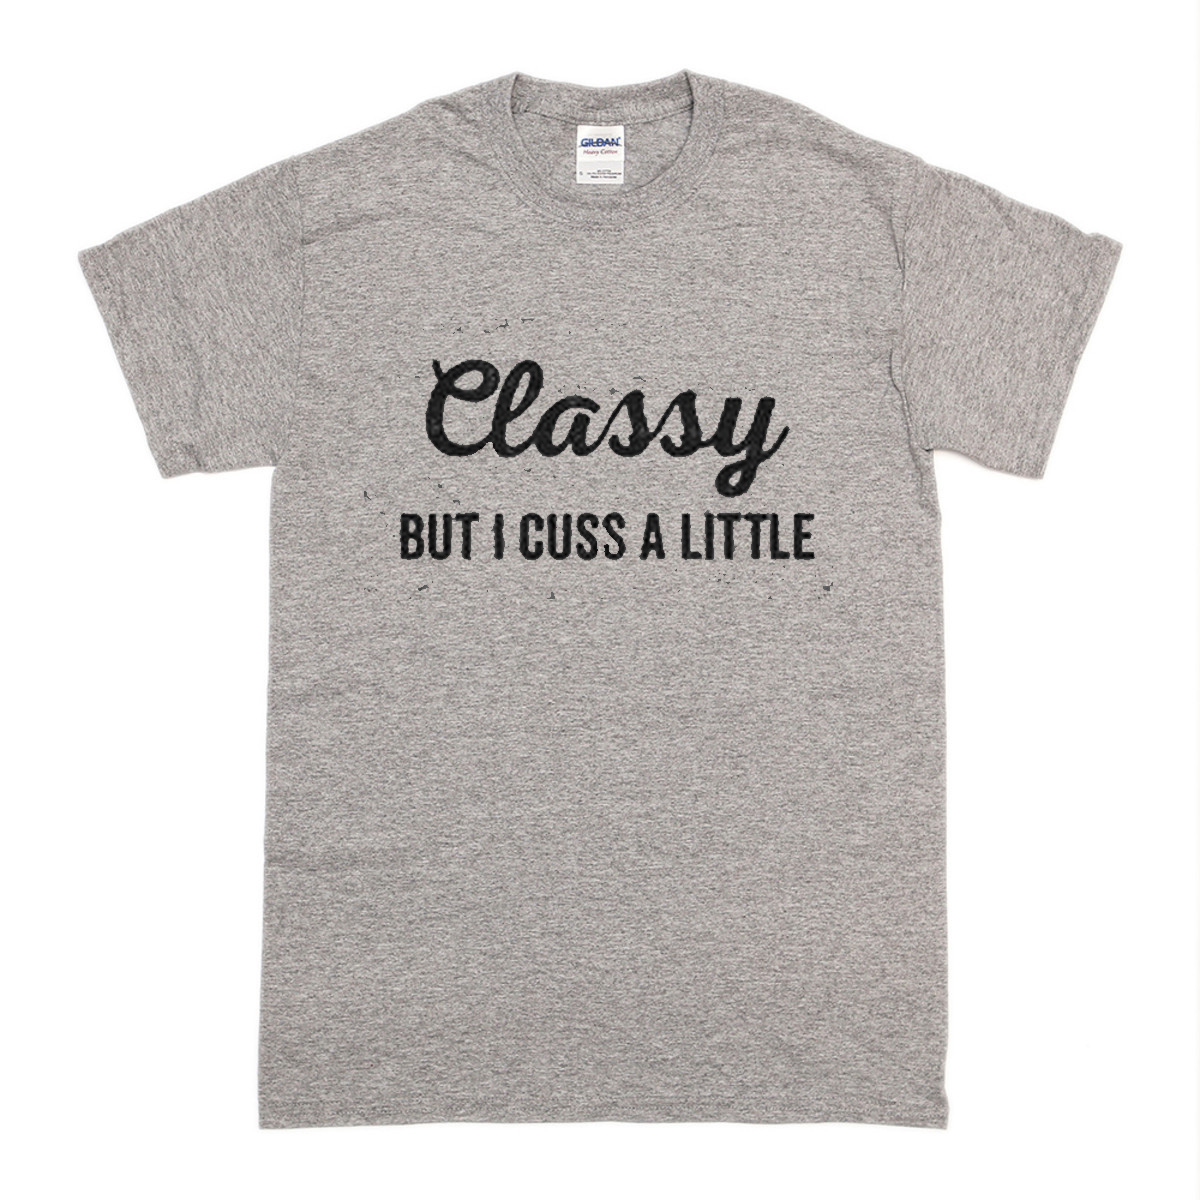 Classy But I Cuss A Little Funny Ladies Soft T Shirt Girlfriend Wife Gift Tee Z4